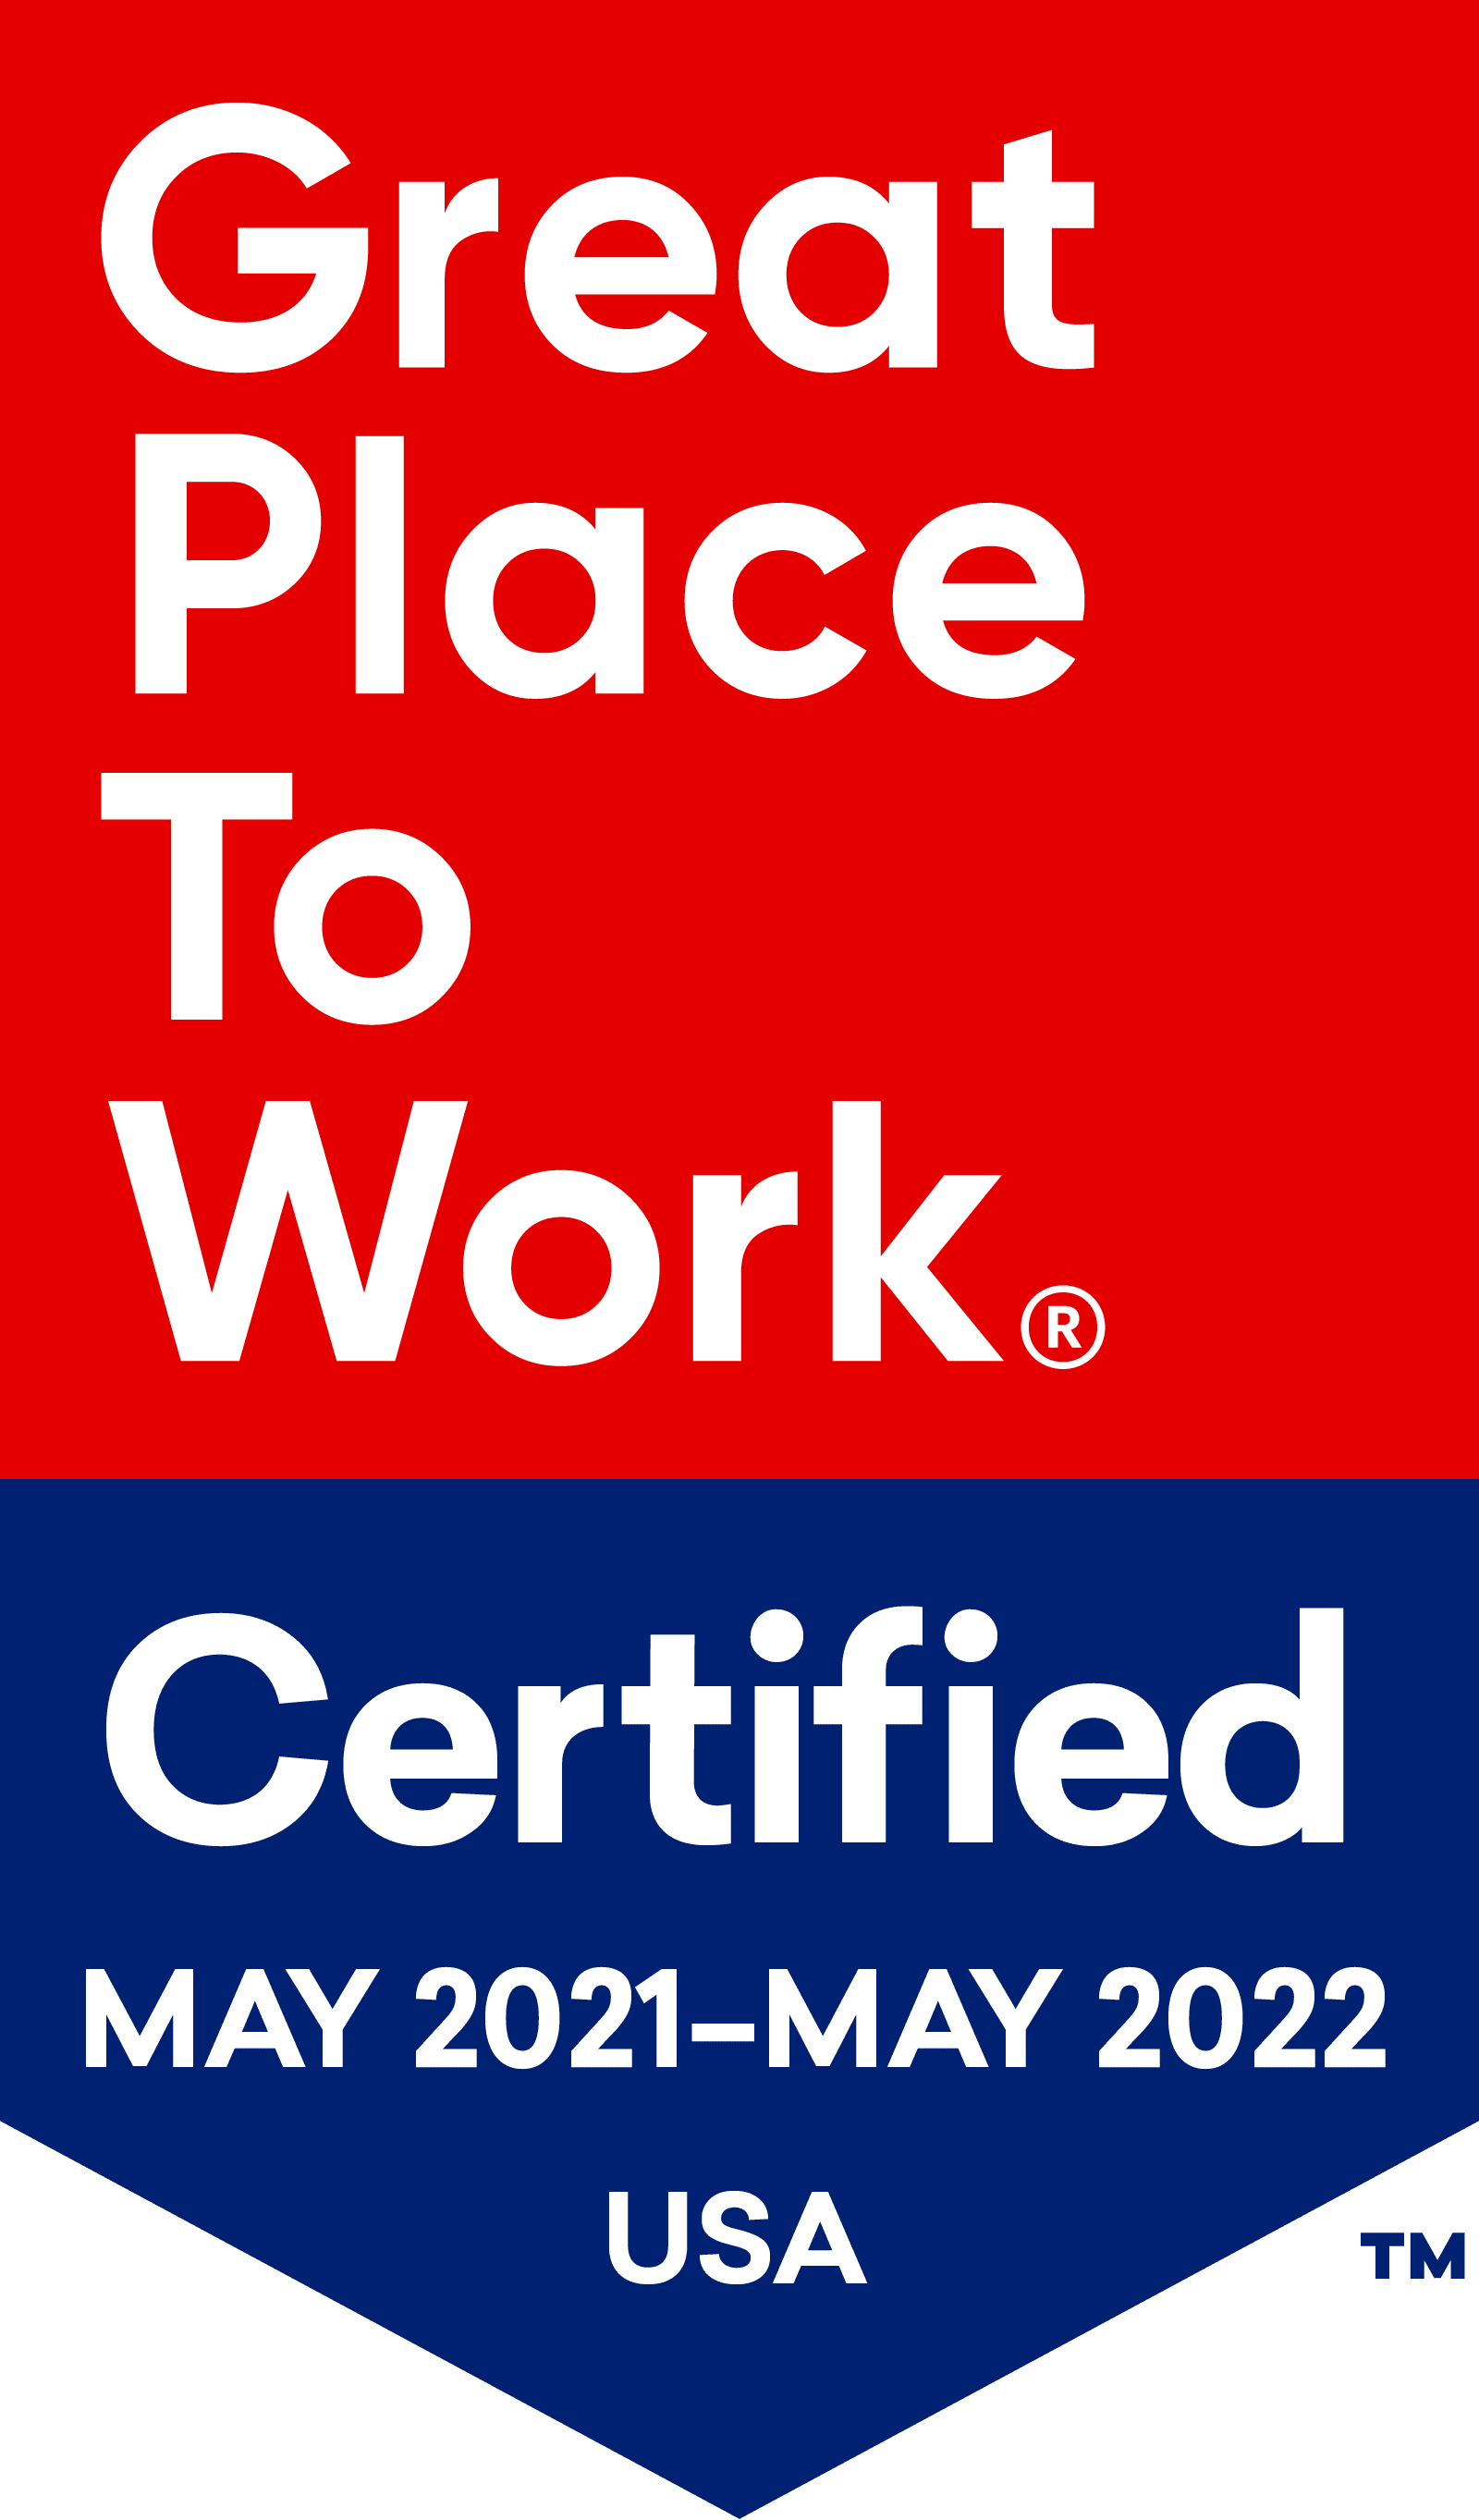 Citrus Place is Great Place To Work Certified